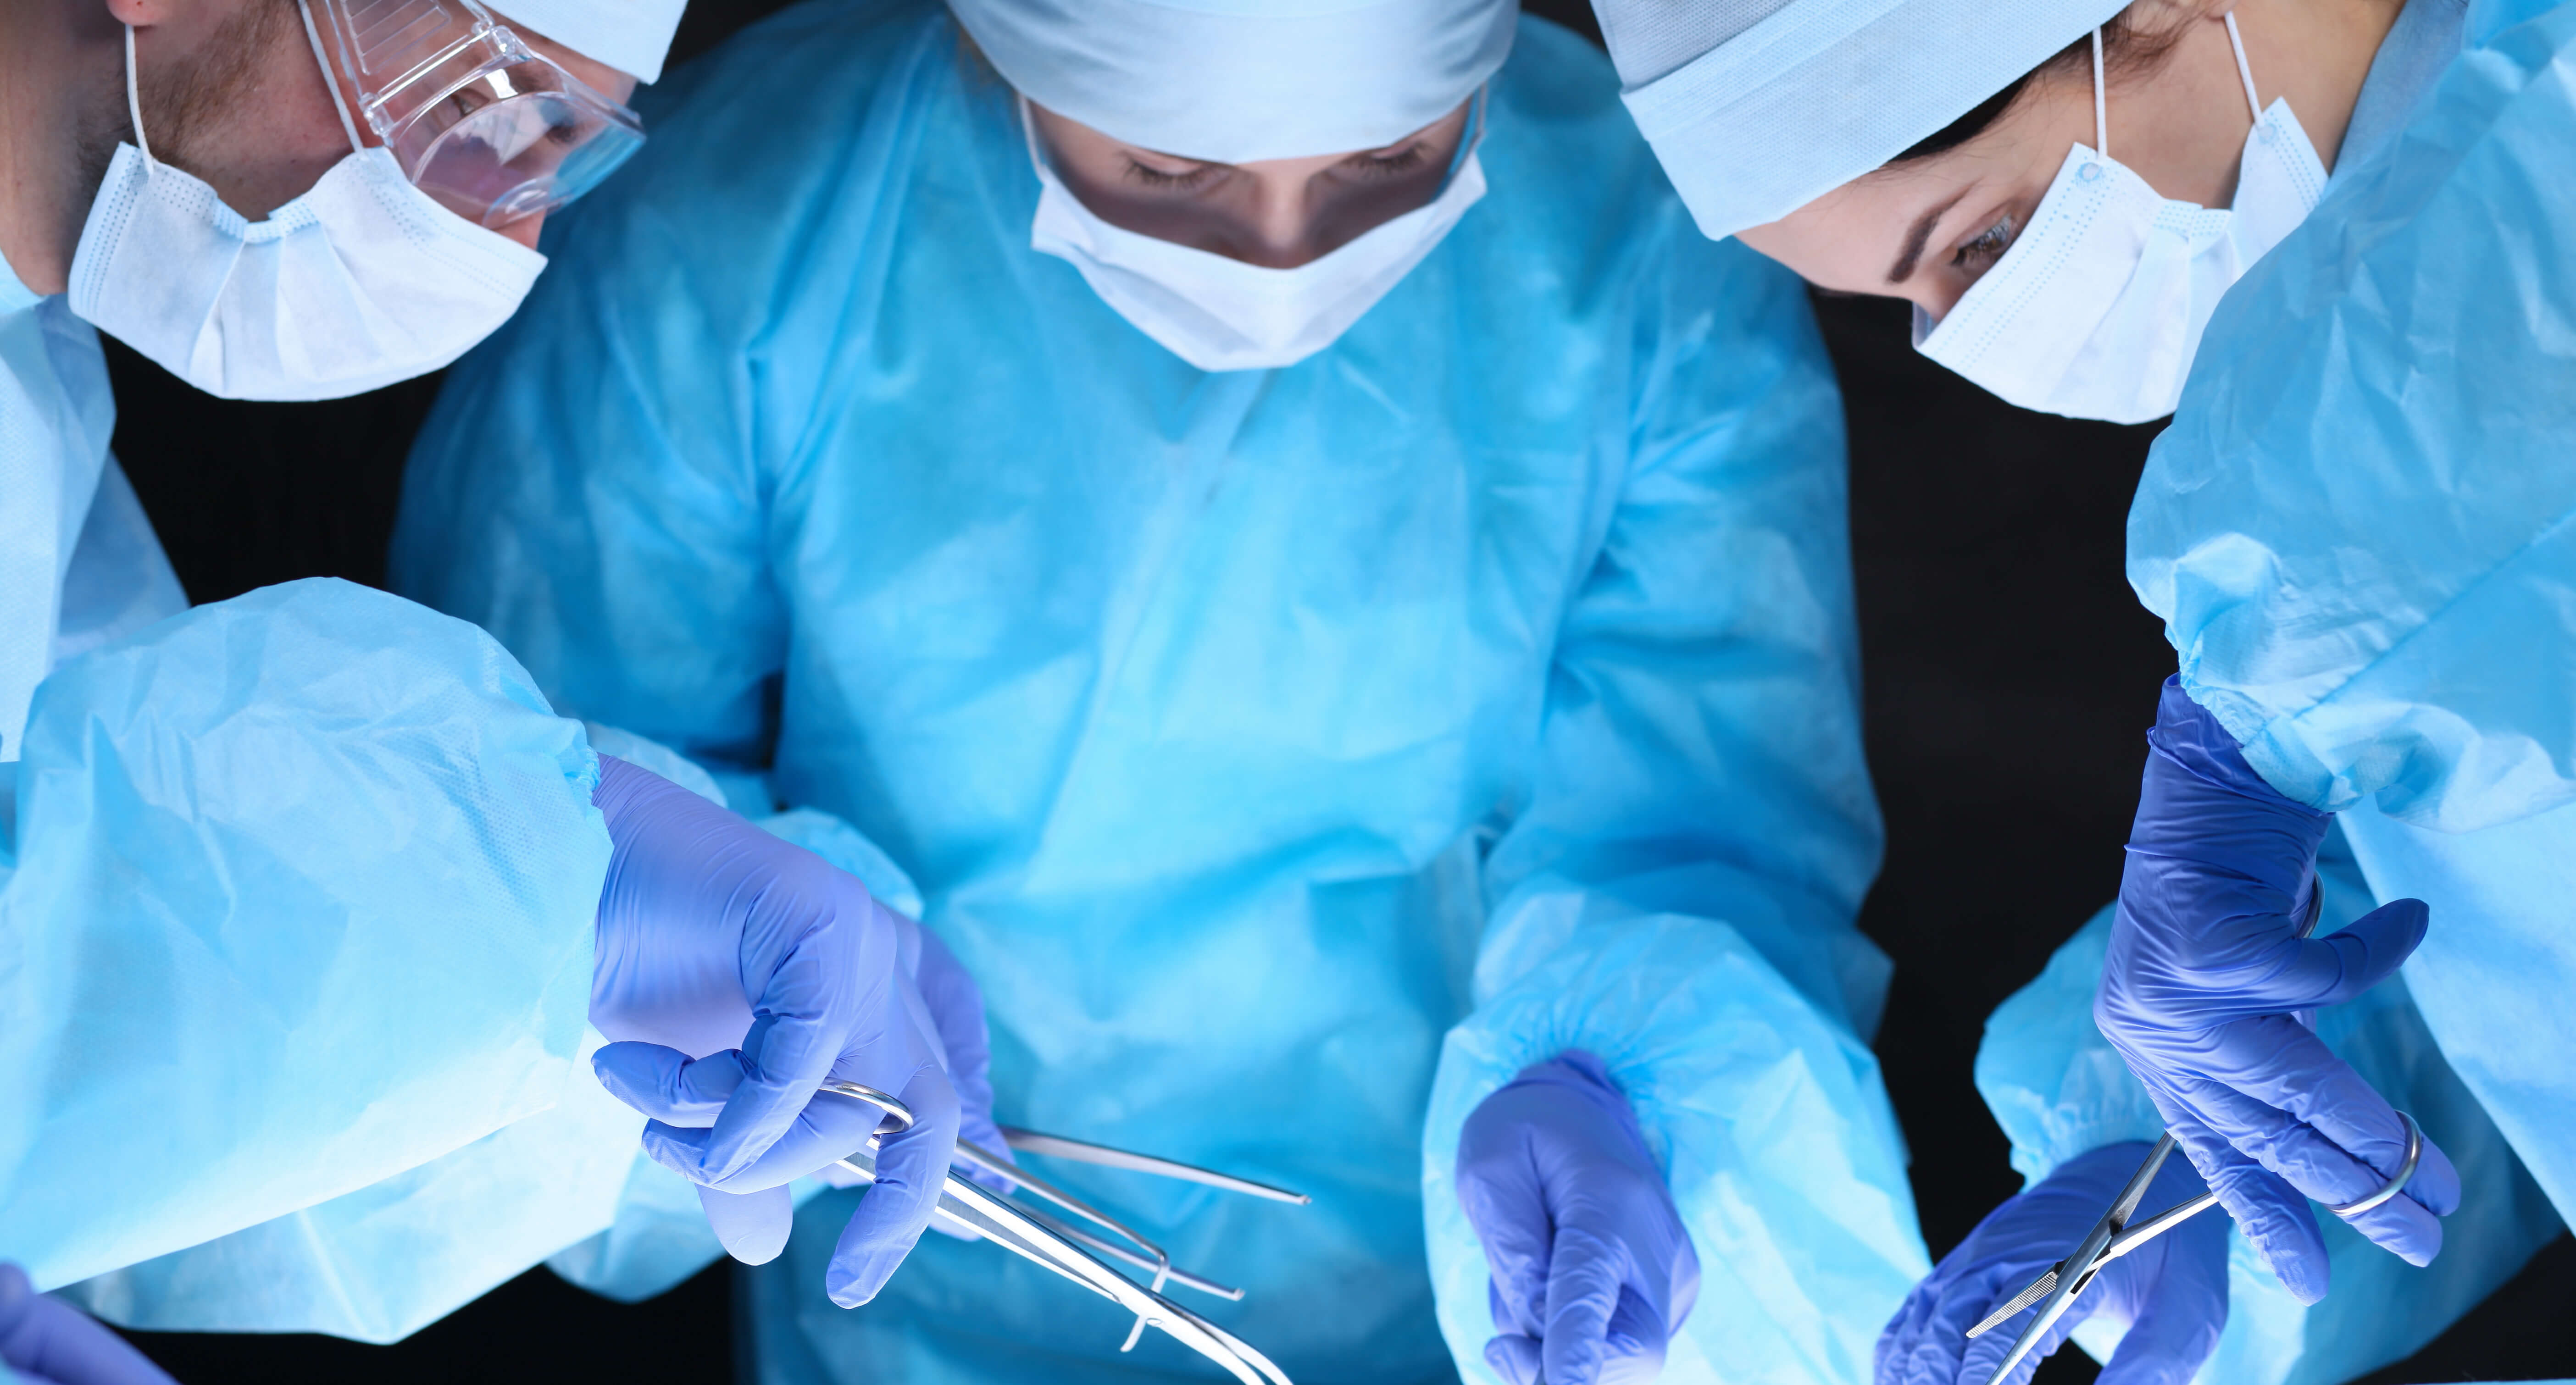 Finding the Right Surgeon is Easier Than You Think